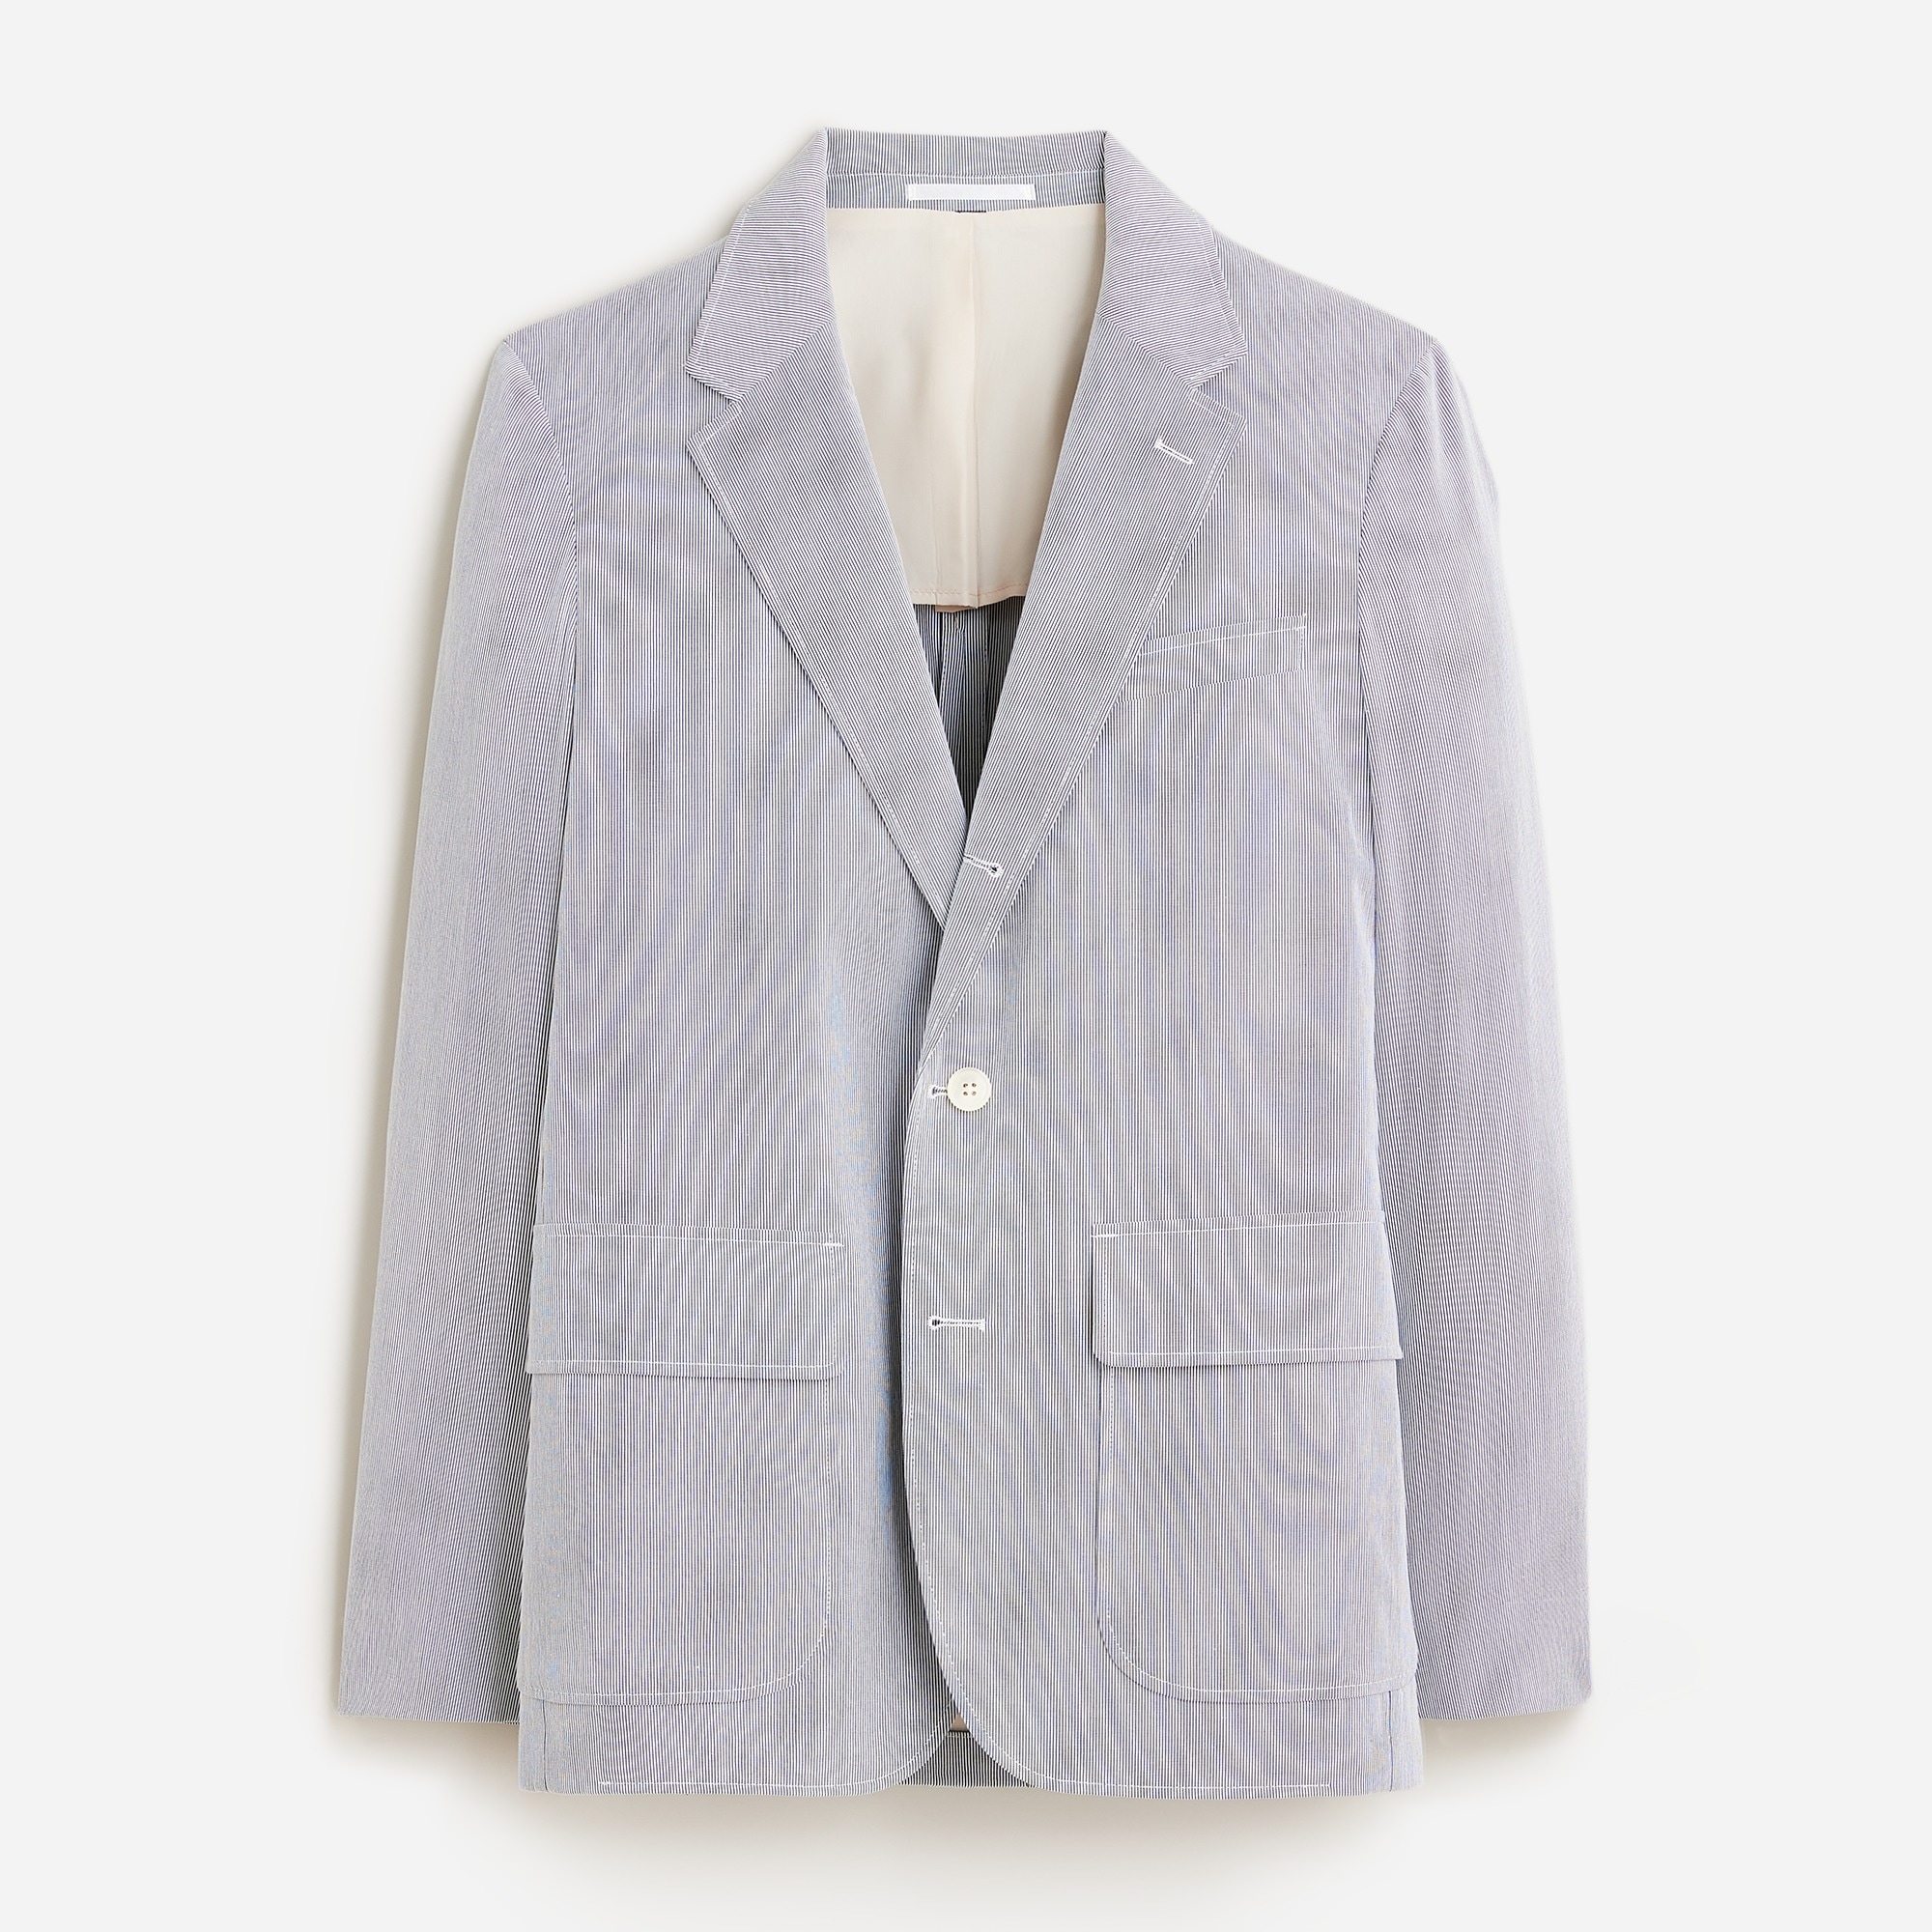  Kenmare Relaxed-fit suit jacket in Italian cotton pincord